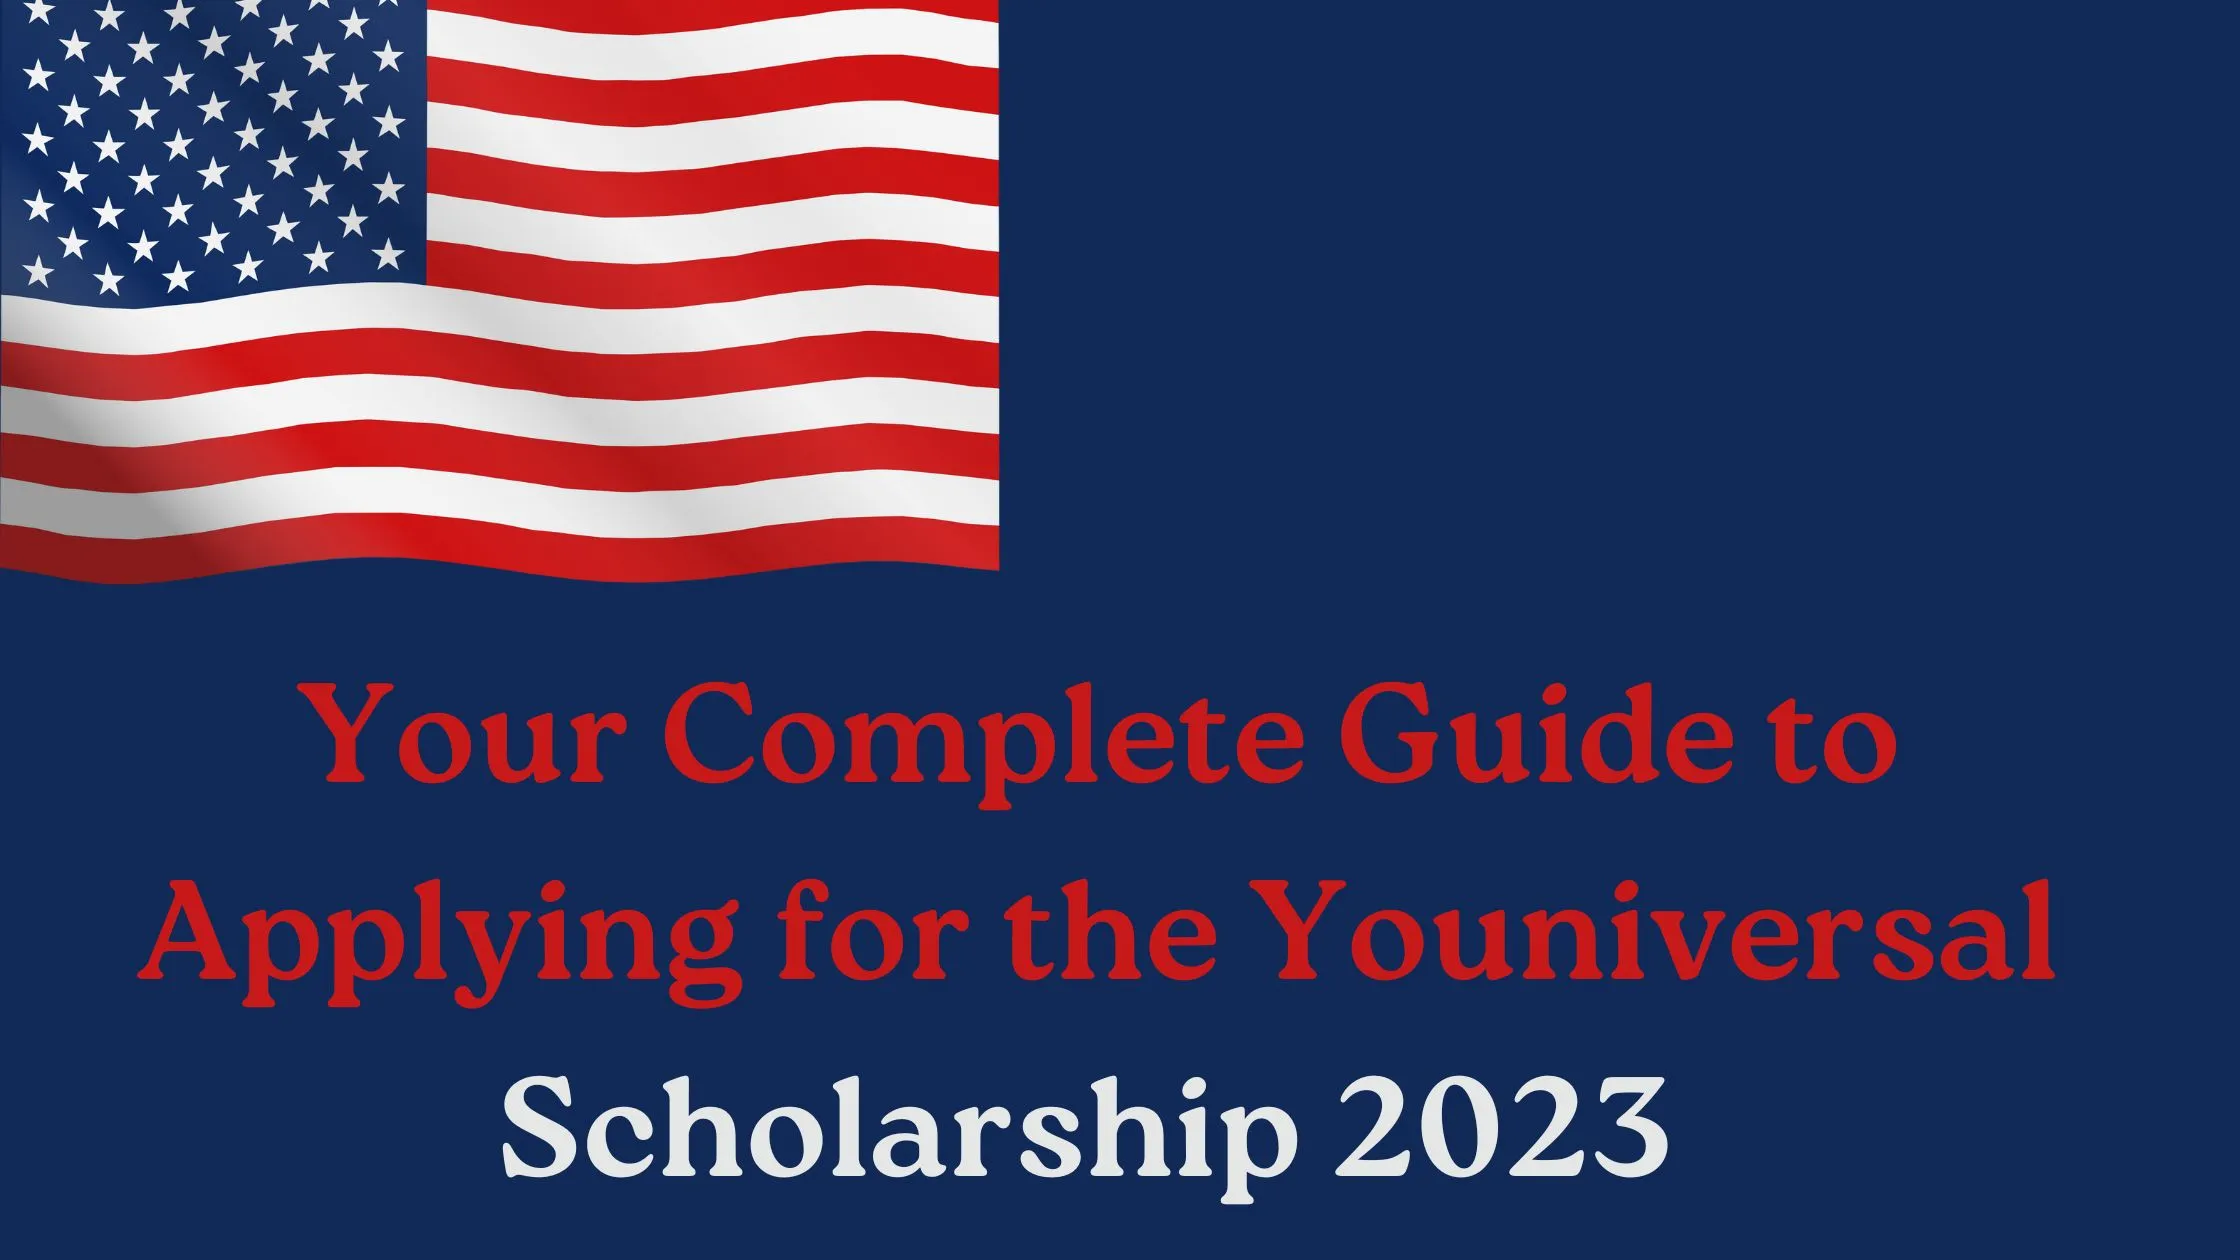 Your Complete Guide to Applying for the Youniversal Scholarship 2023